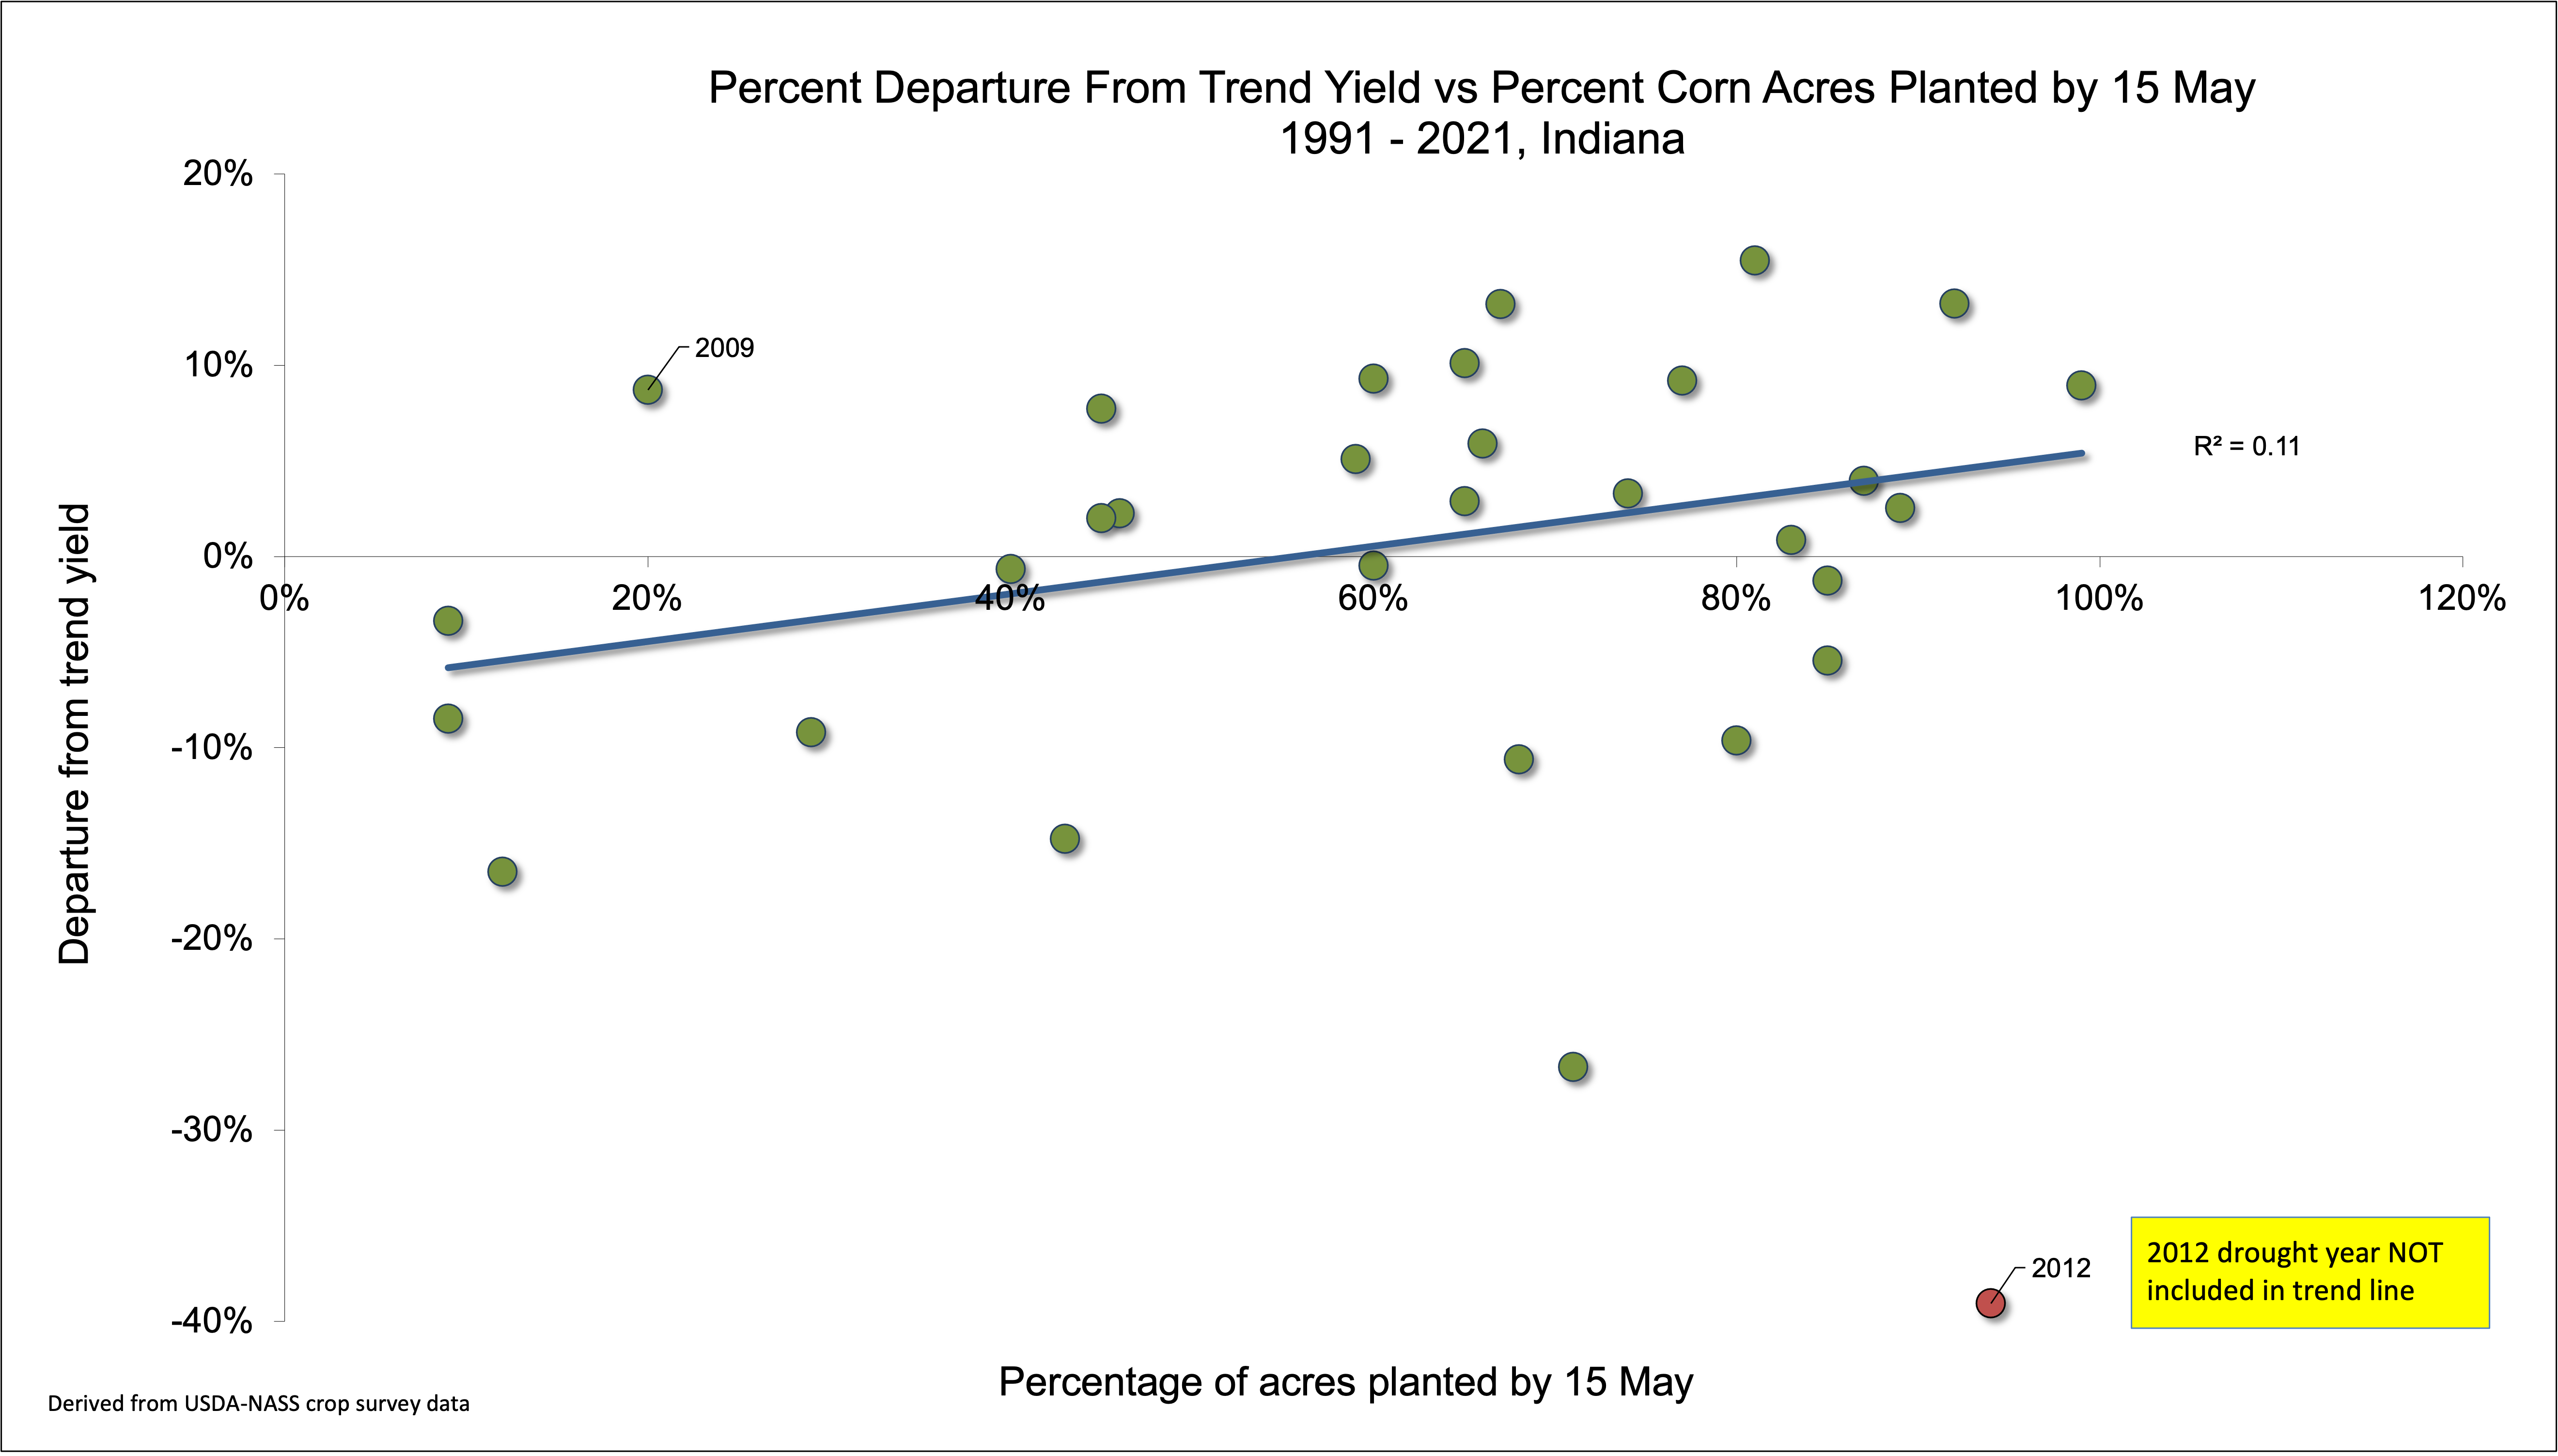 Percent departure from statewide trend vs. percent corn acres planted by May 15 